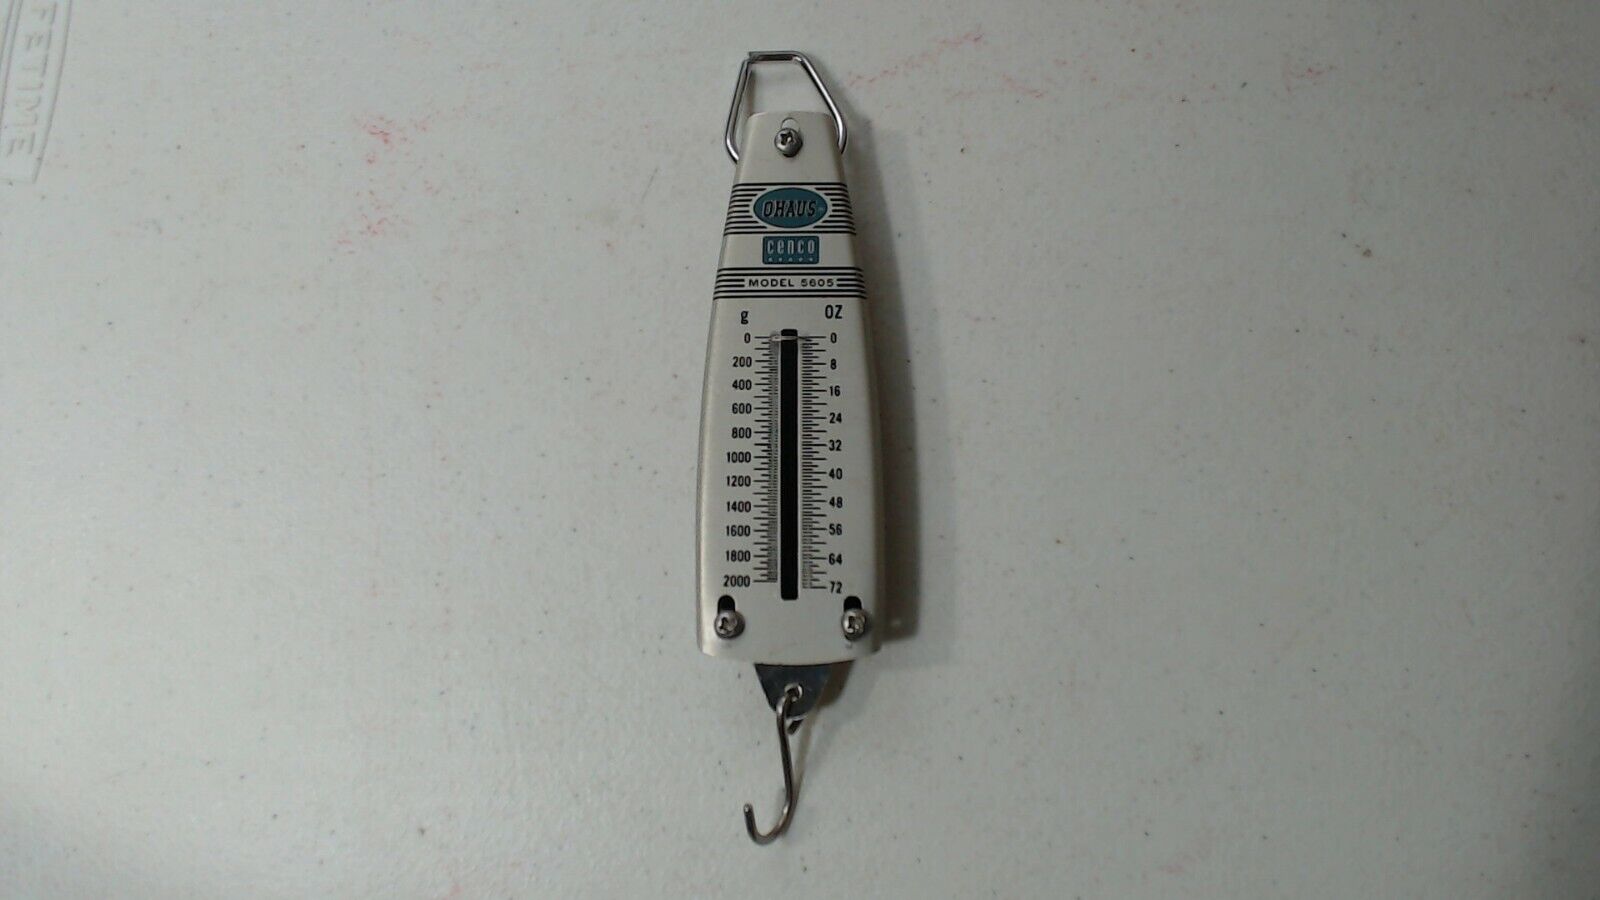 VINTAGE OHAUS Spring Scale Model 5605 72 Ounces 2000g